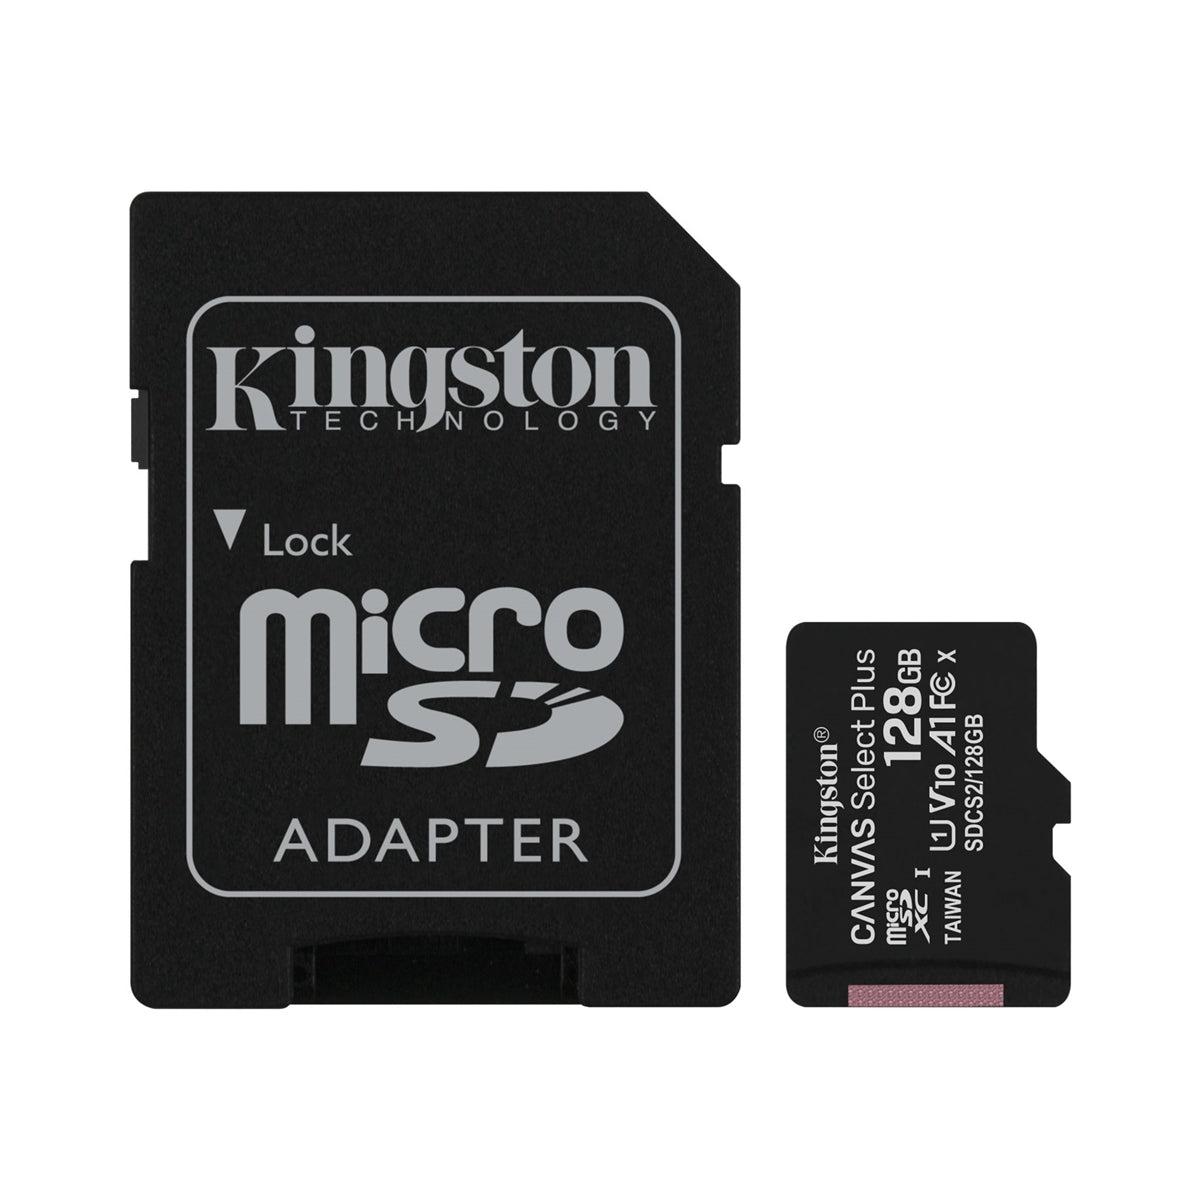 Kingston Canvas Select Plus (Micro SD) 100 MB/s 128GB-Memory Cards & SSD-First Help Tech